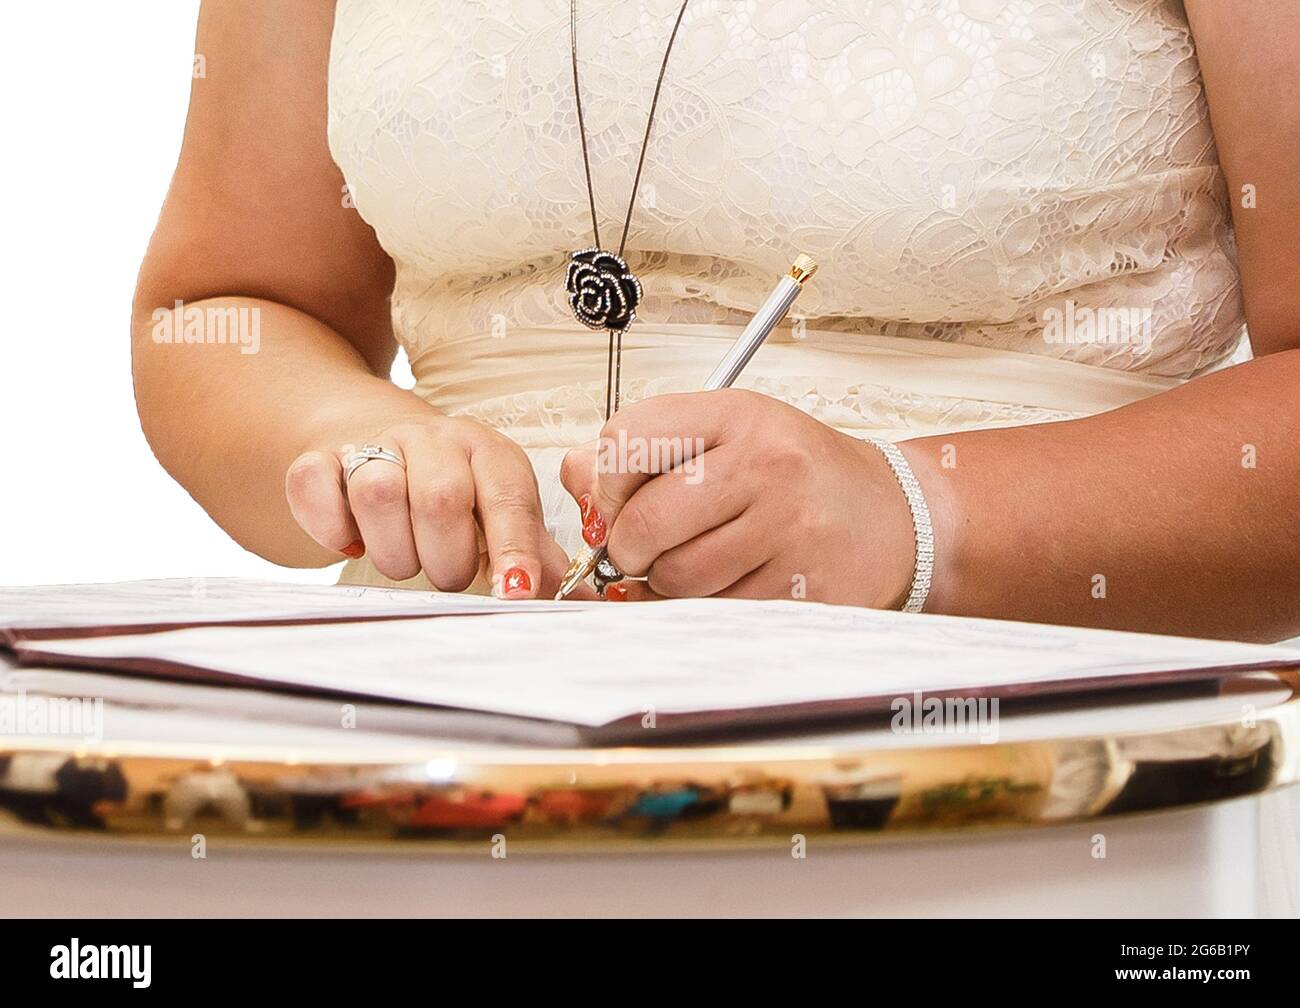 The girl's hands at the wedding put their signature pen in the magazine about marriage registration. Stock Photo